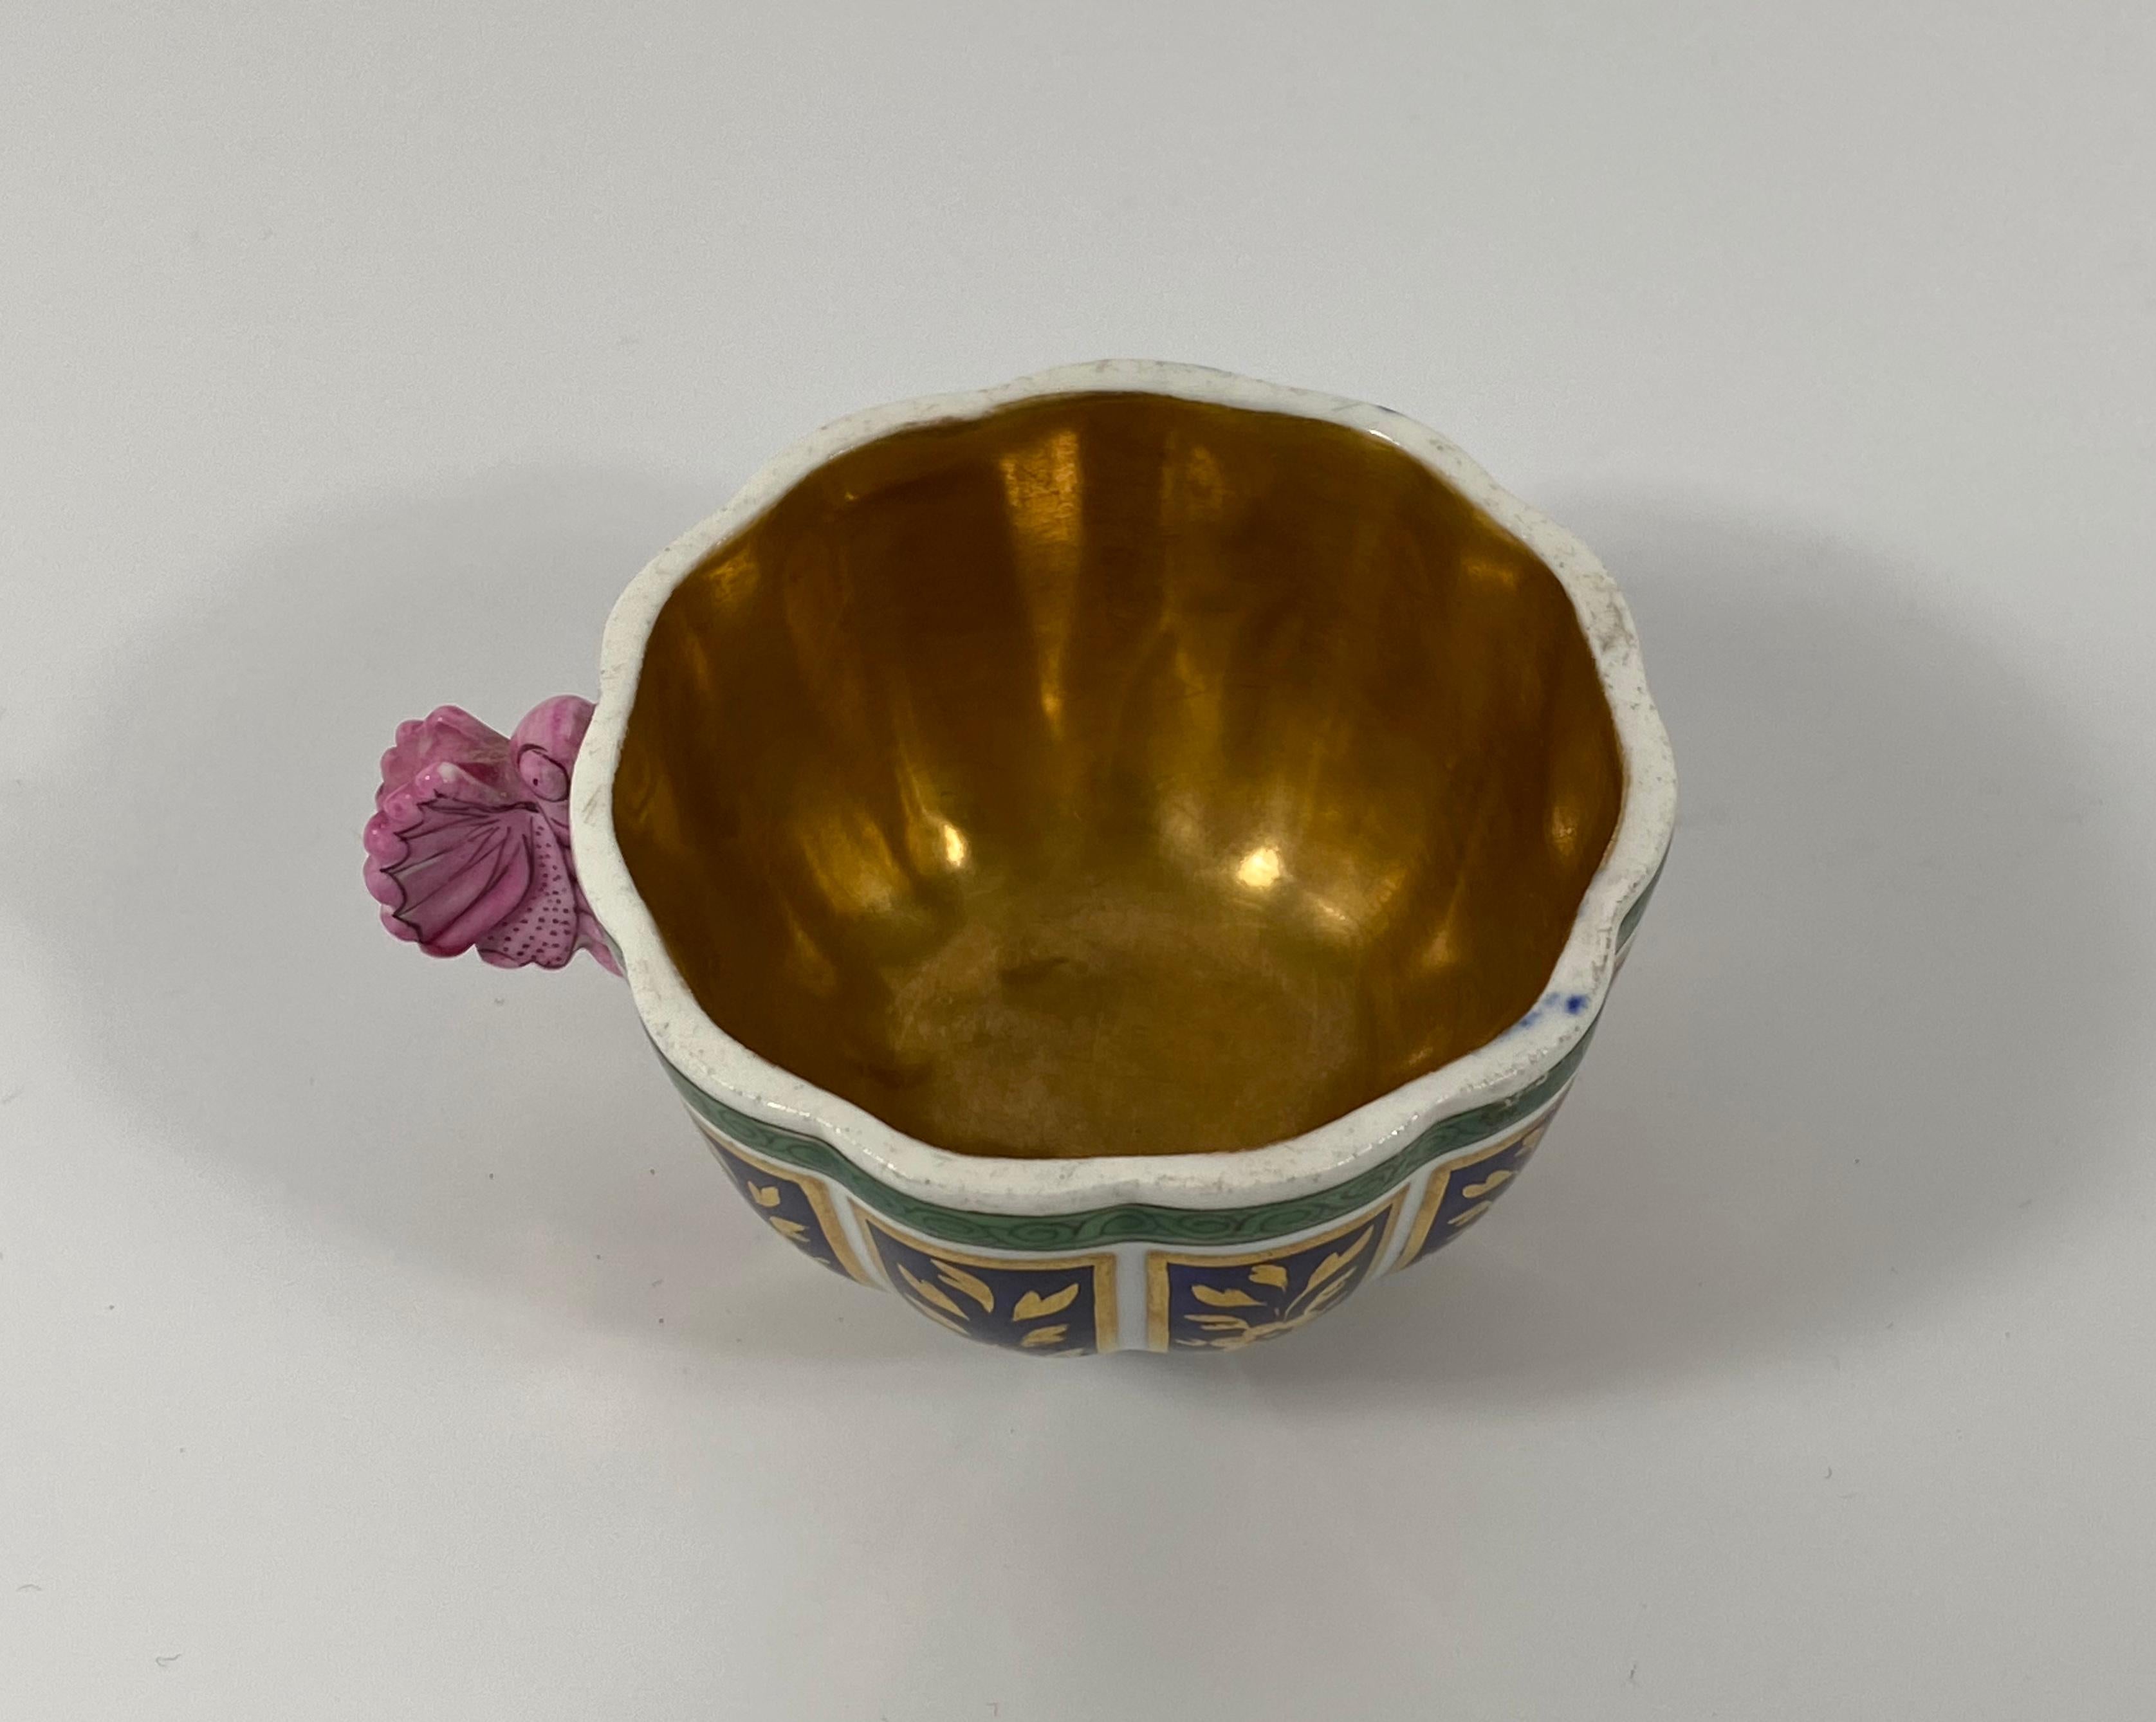 Fired Spode Porcelain Cup and Saucer, ‘Butterfly’ Handle, circa 1810